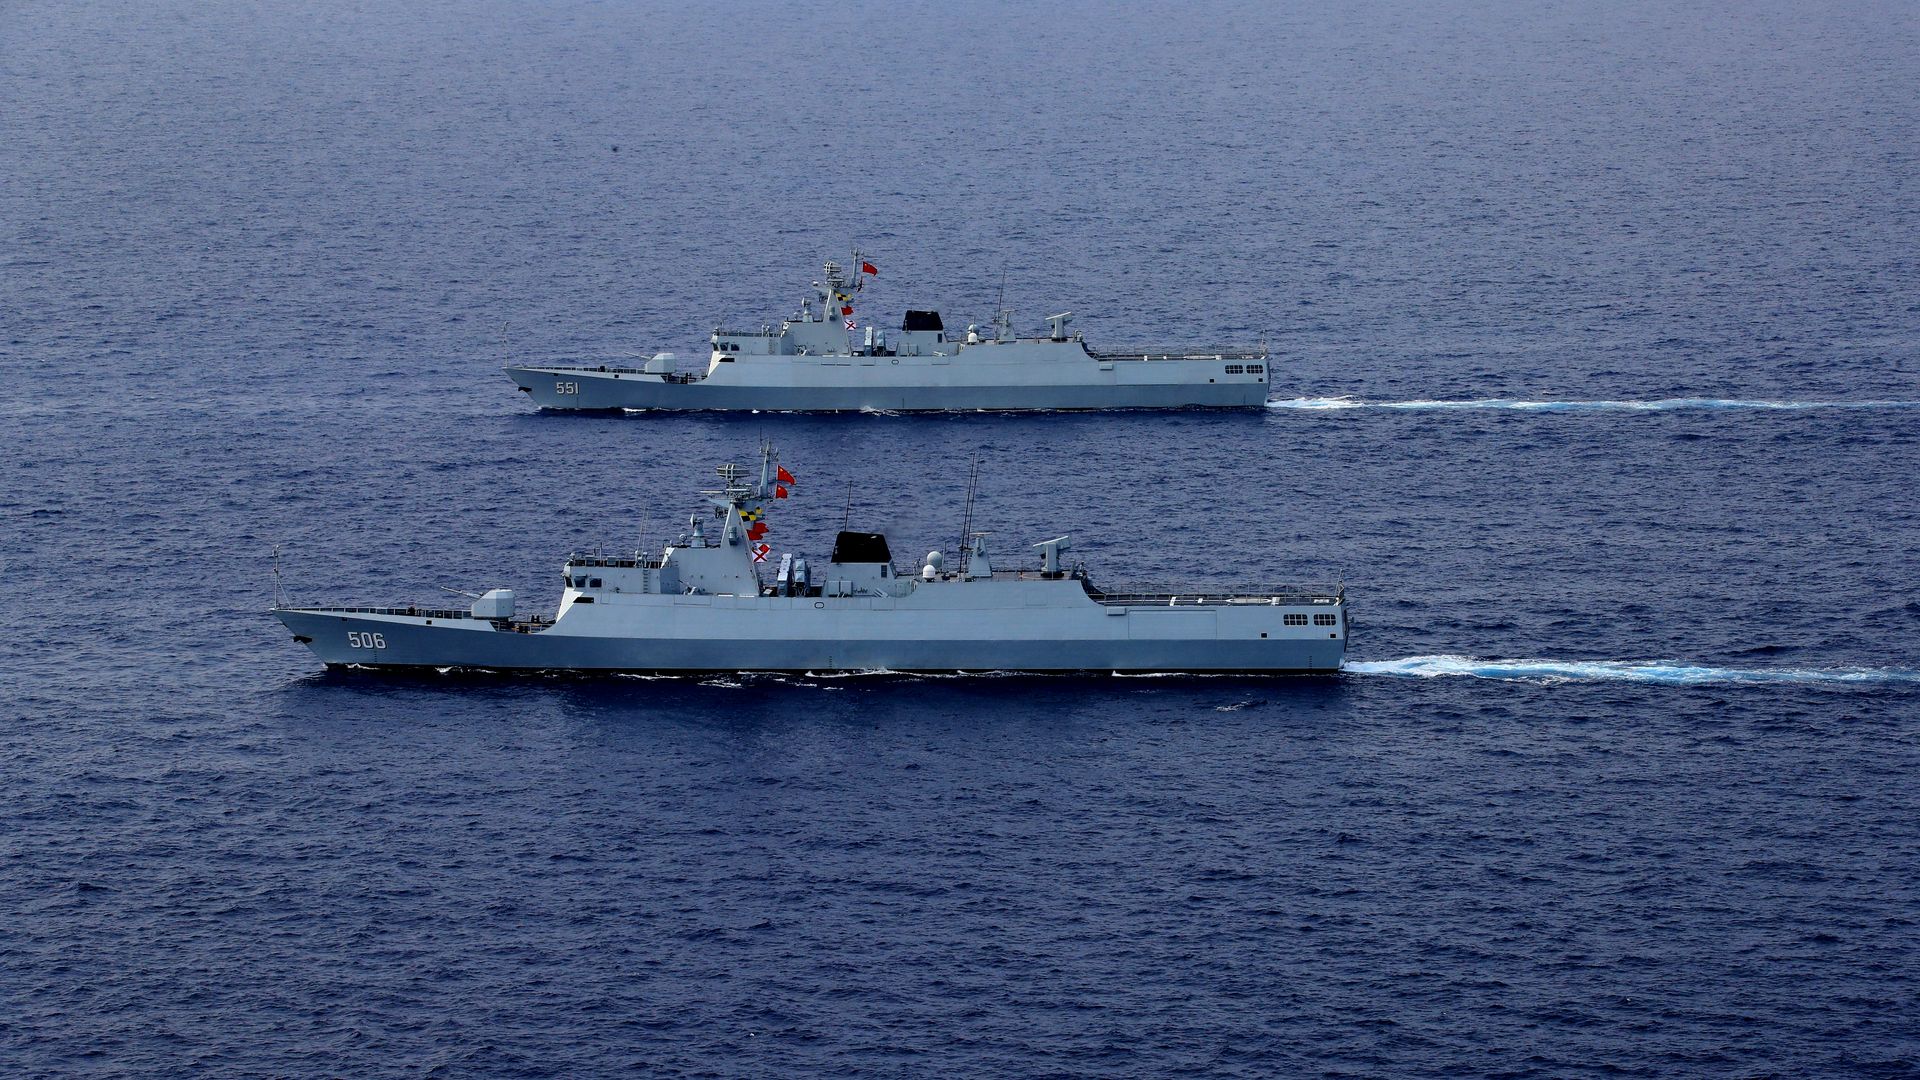 A PLA Navy fleet in the South China Sea.